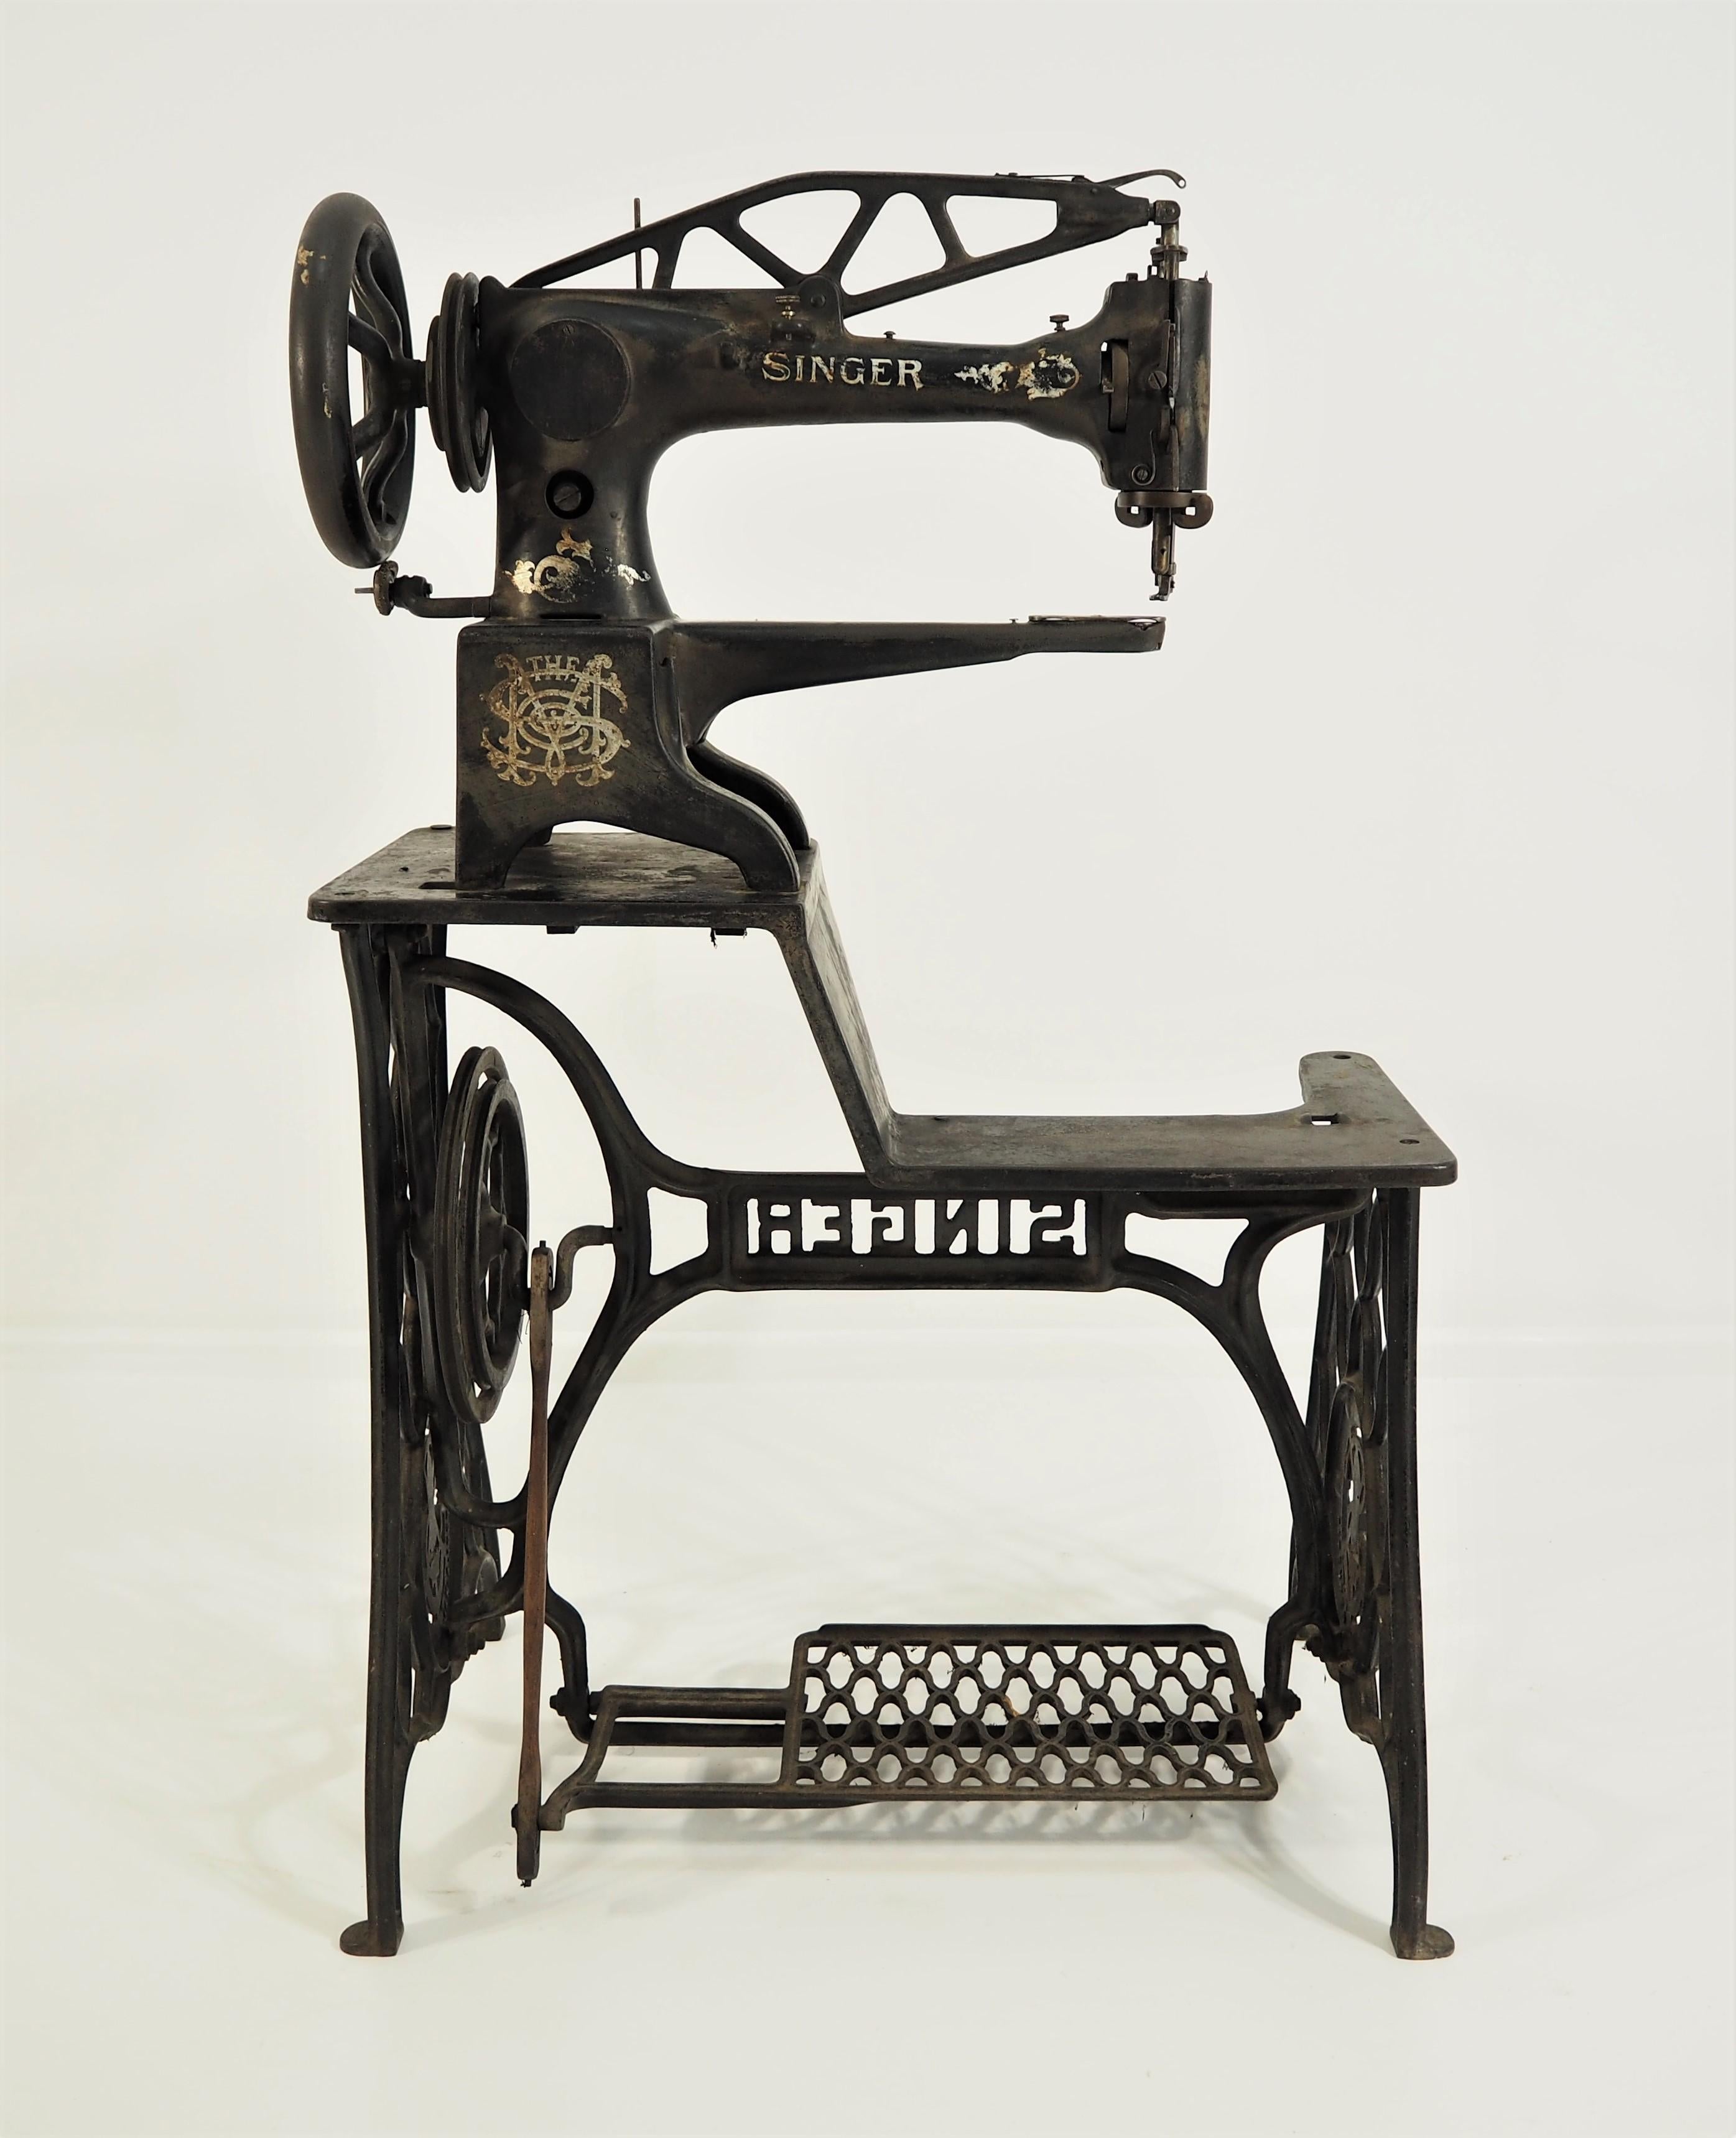 Sewing Machine from Singer, circa 1920s 2